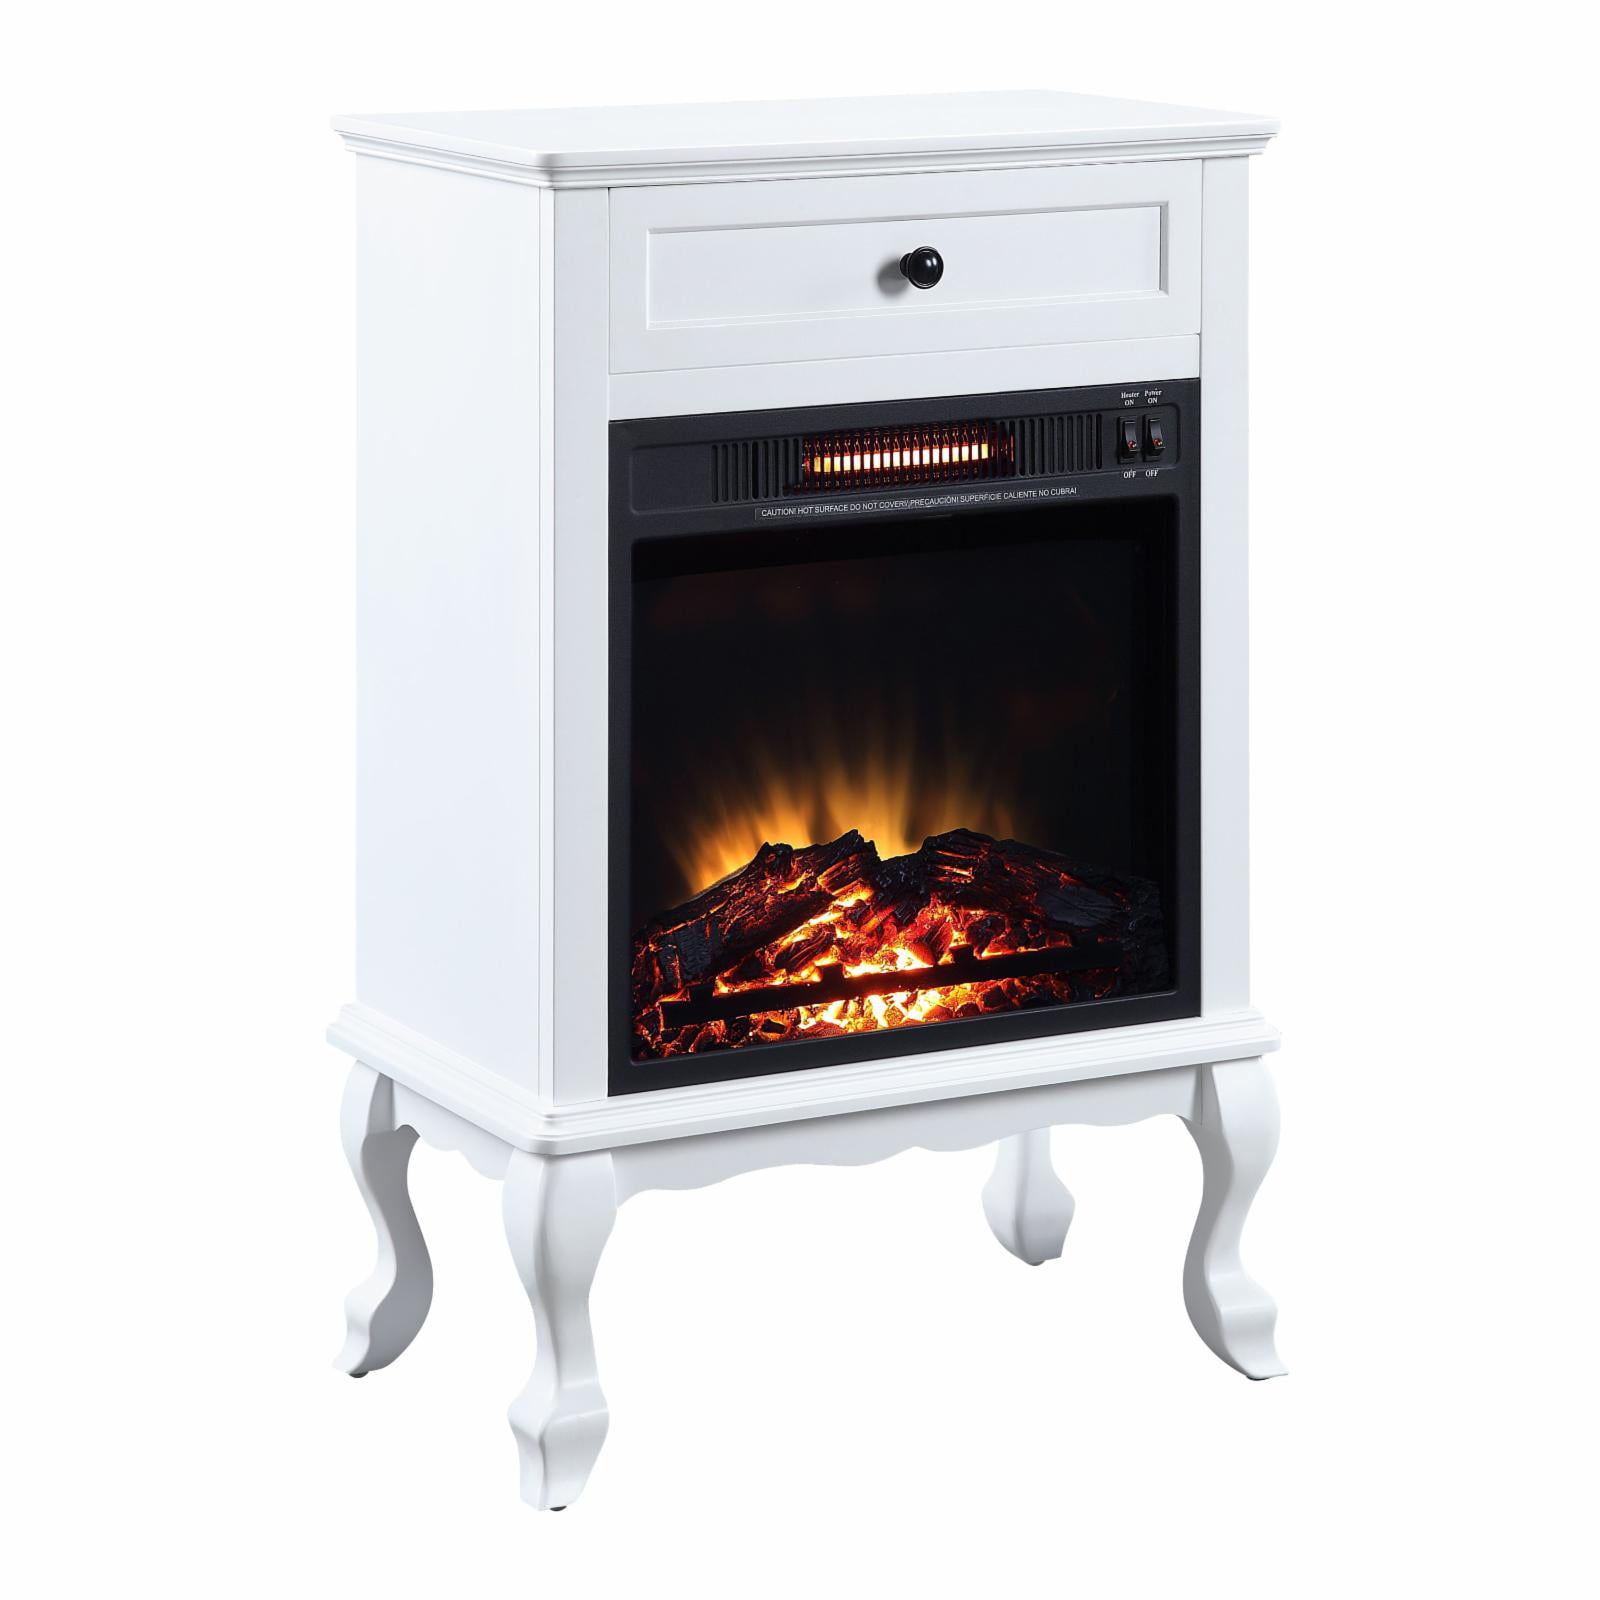 Picture of Acme Furniture AC00853 23 x 13 x 34 in. Eirene Fireplace, White